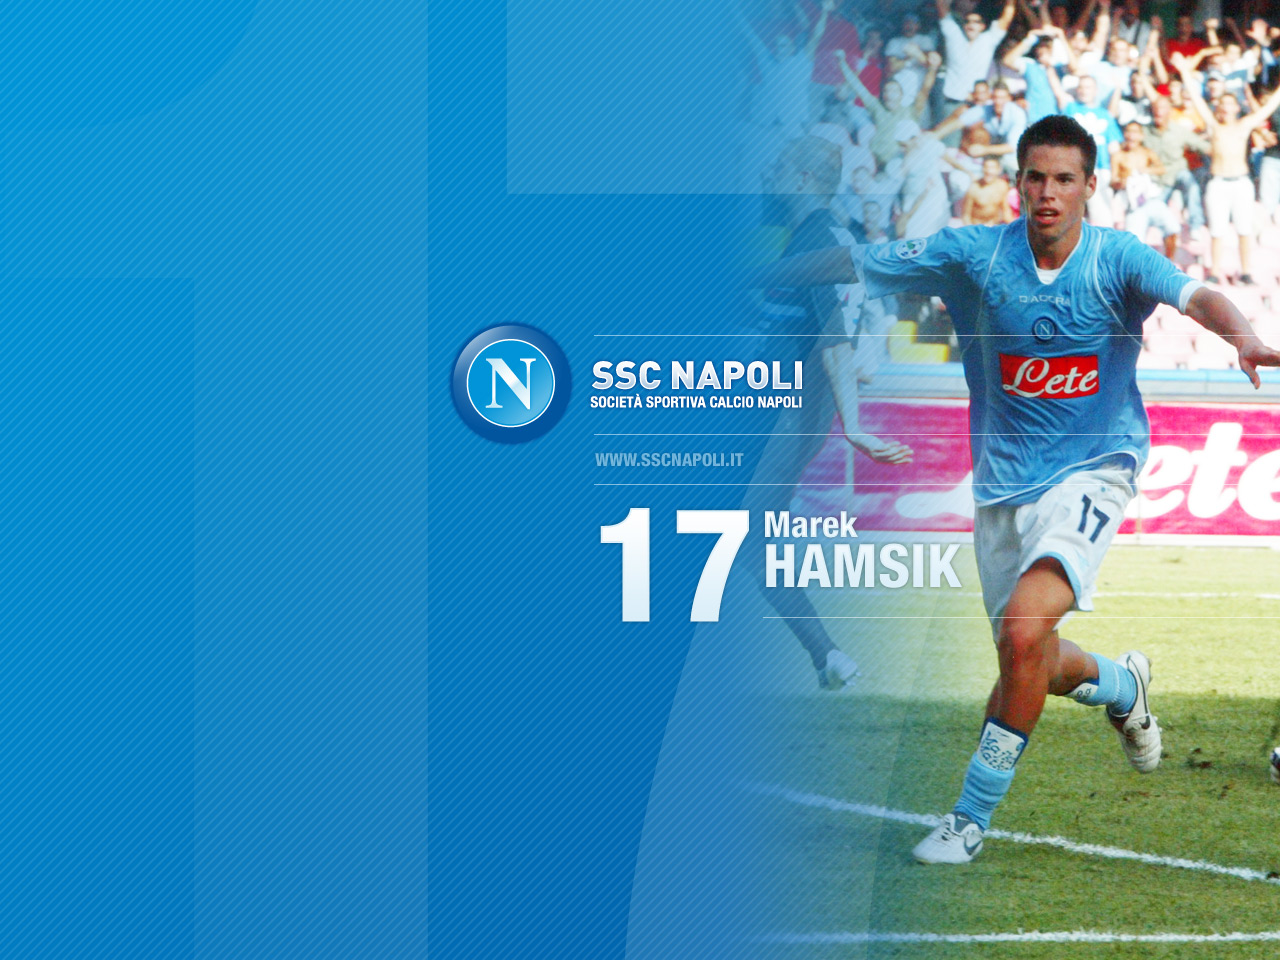 All About Football Players: Marek Hamsik Hd Wallpapers 2012